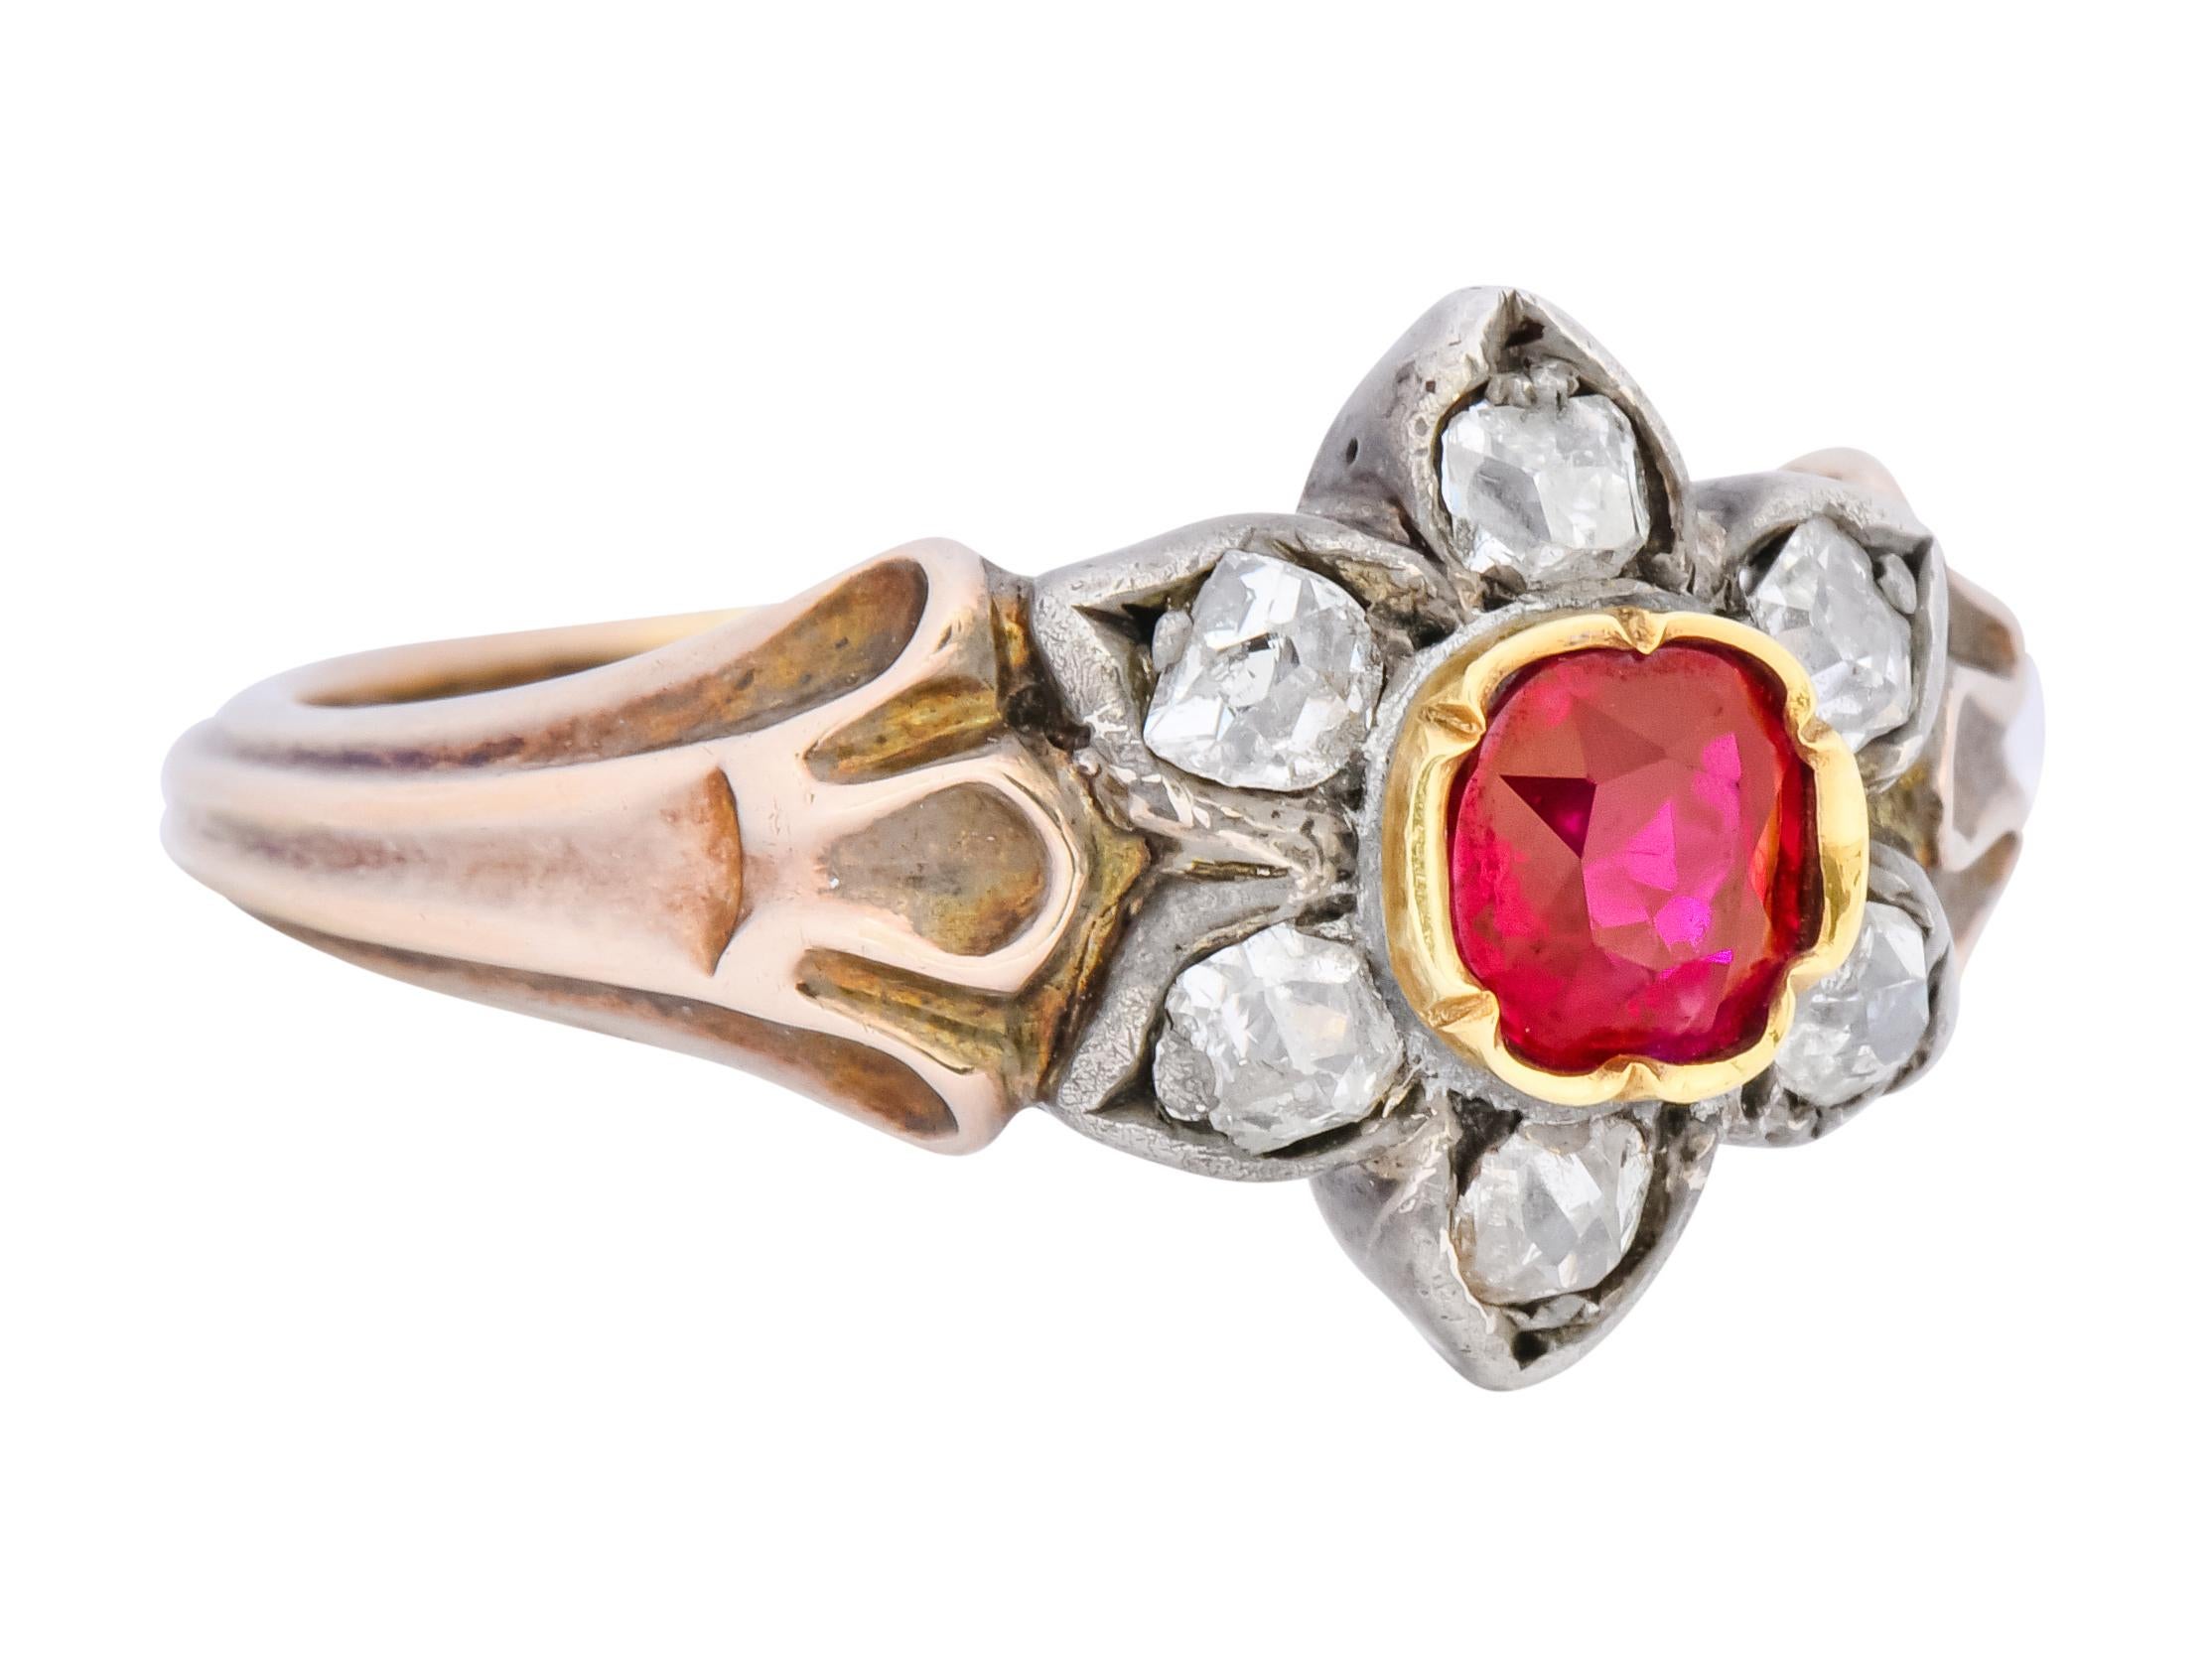 Cluster style ring centering a cushion cut ruby weighing approximately 0.75 carat total, graver set within a polished gold surround, transparent and vividly red in color

Surrounded by old mine cut diamonds, set as silver petals, weighing 0.42 carat